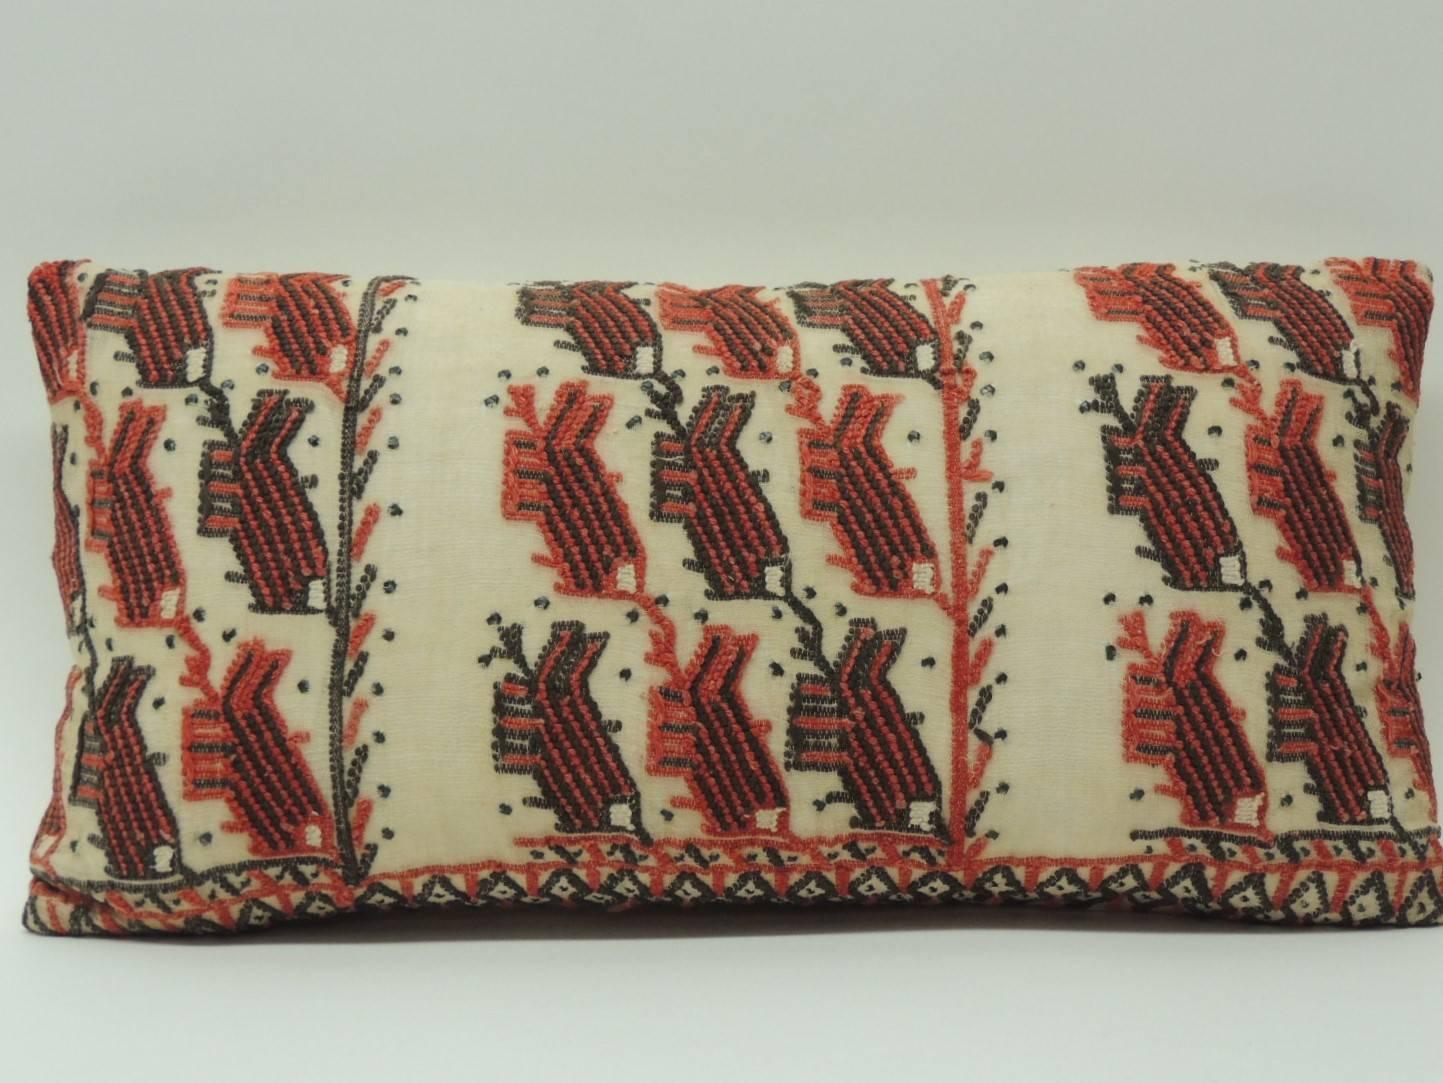 Antique Textiles Galleries...
19th century, Turkish embroidered lumbar pillow in wool and metallic threads embroidered on sheer linen with shades of red, brown and orange. Natural linen backing.  Pillow hand-made and designed in the USA.  Closure by